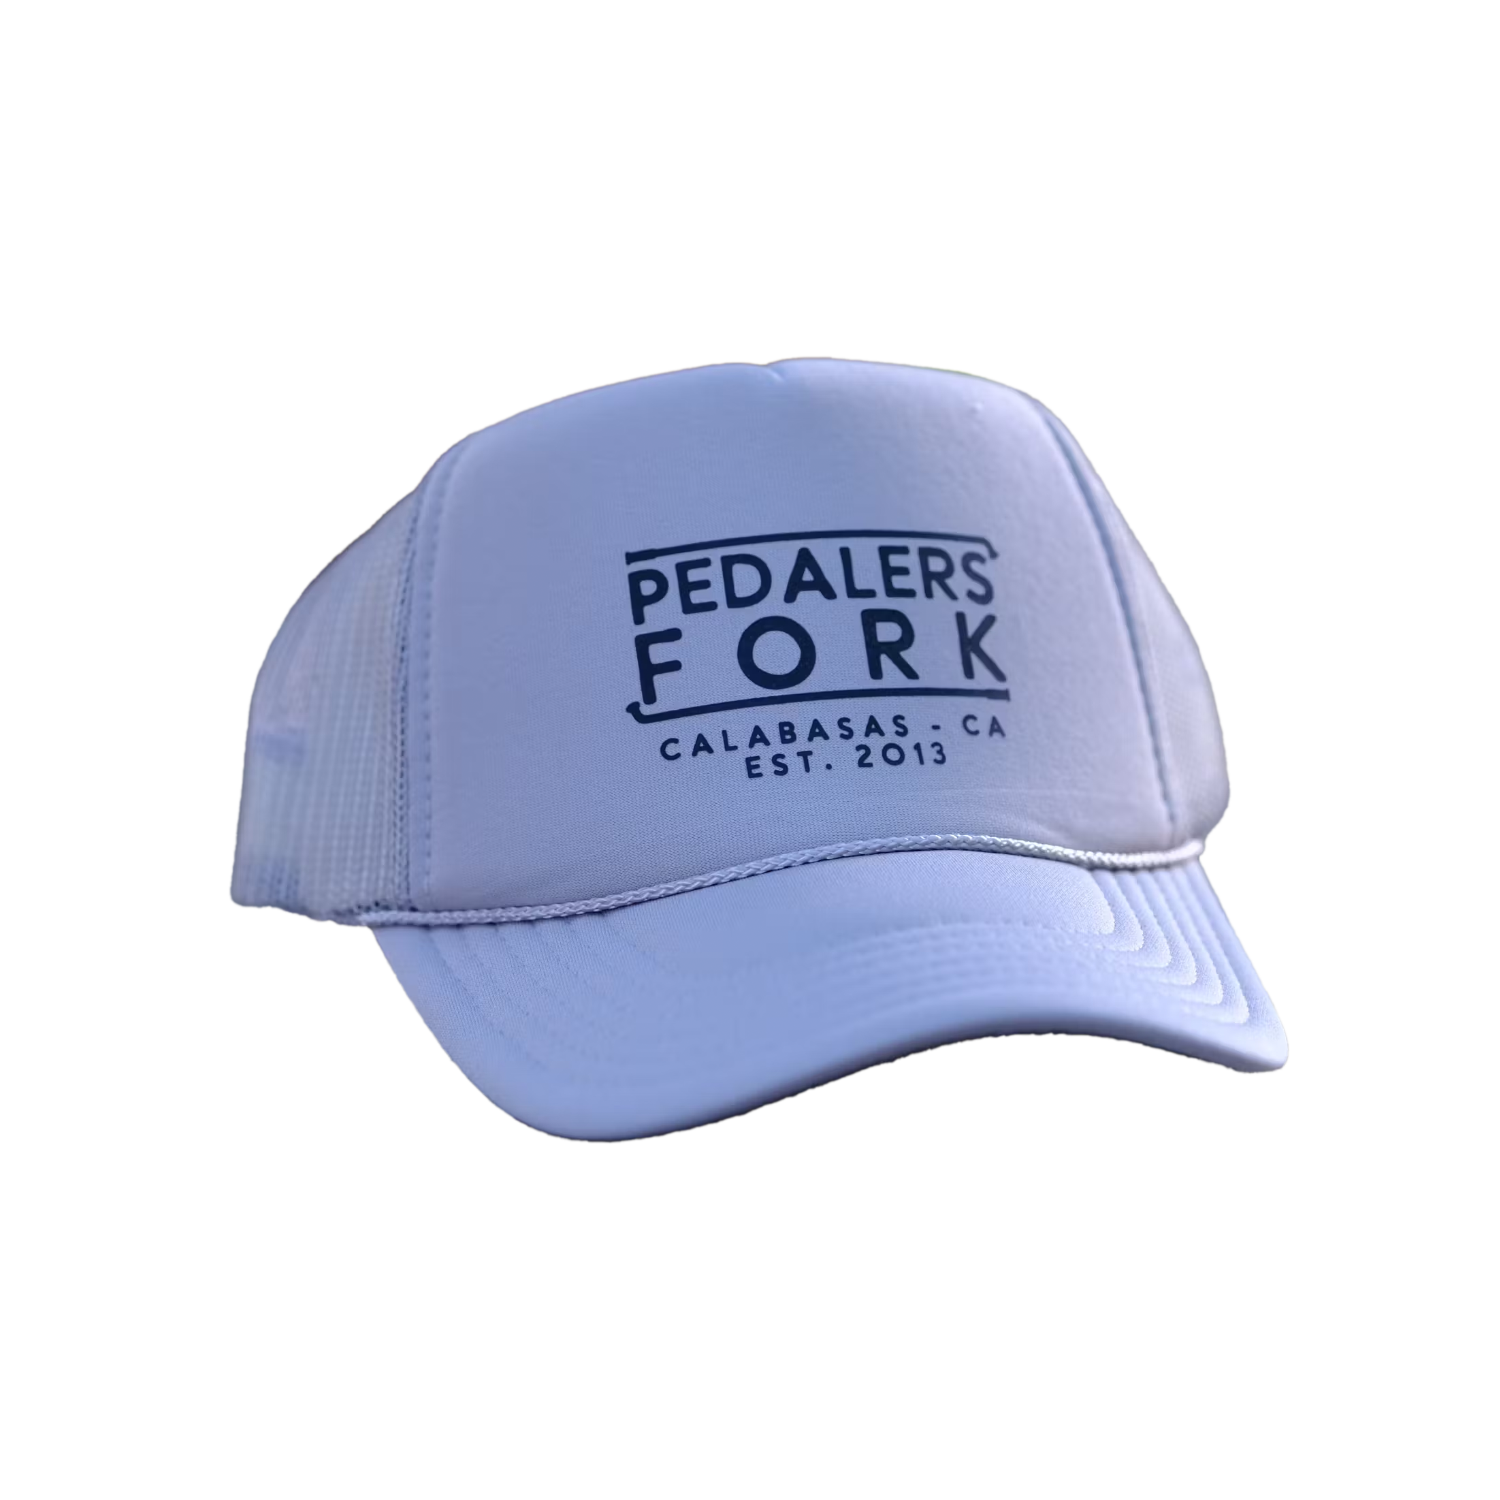 Trucker Hat with Pedalers Fork logo and text "Calabasas, CA. EST. 2013"